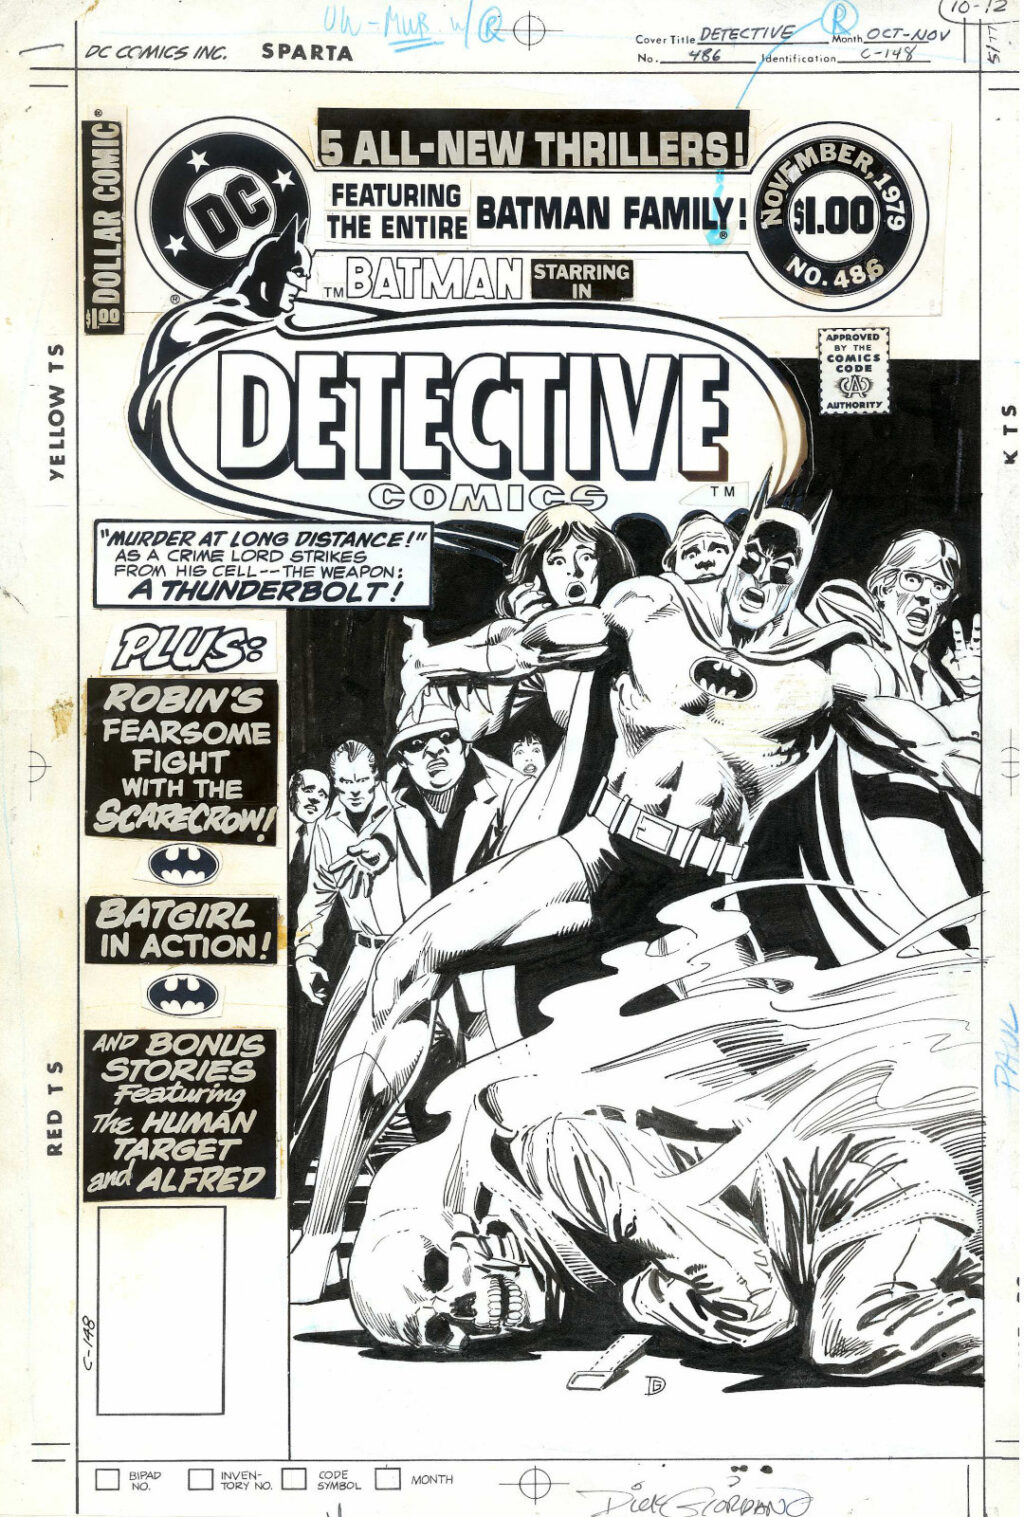 Detective Comics issue 486 cover by Dick Giordano